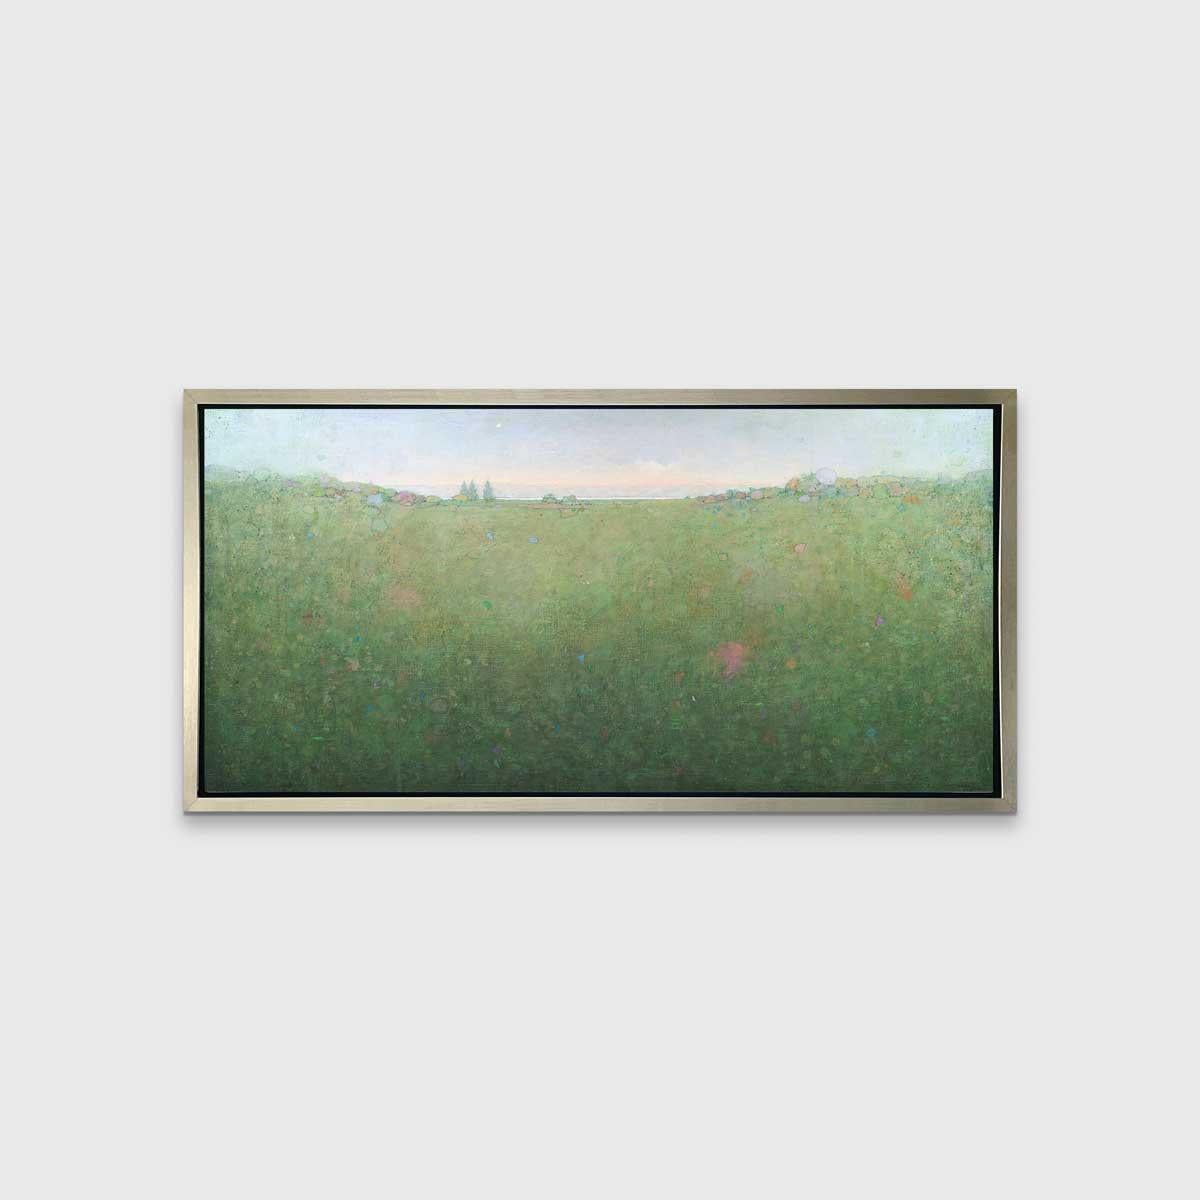 This abstract landscape limited edition print by Elwood Howell features a cool, green and pale blue palette. The artist's signature high horizon line forms a very slight valley at the center, with shapes like foliage and trees in different pale